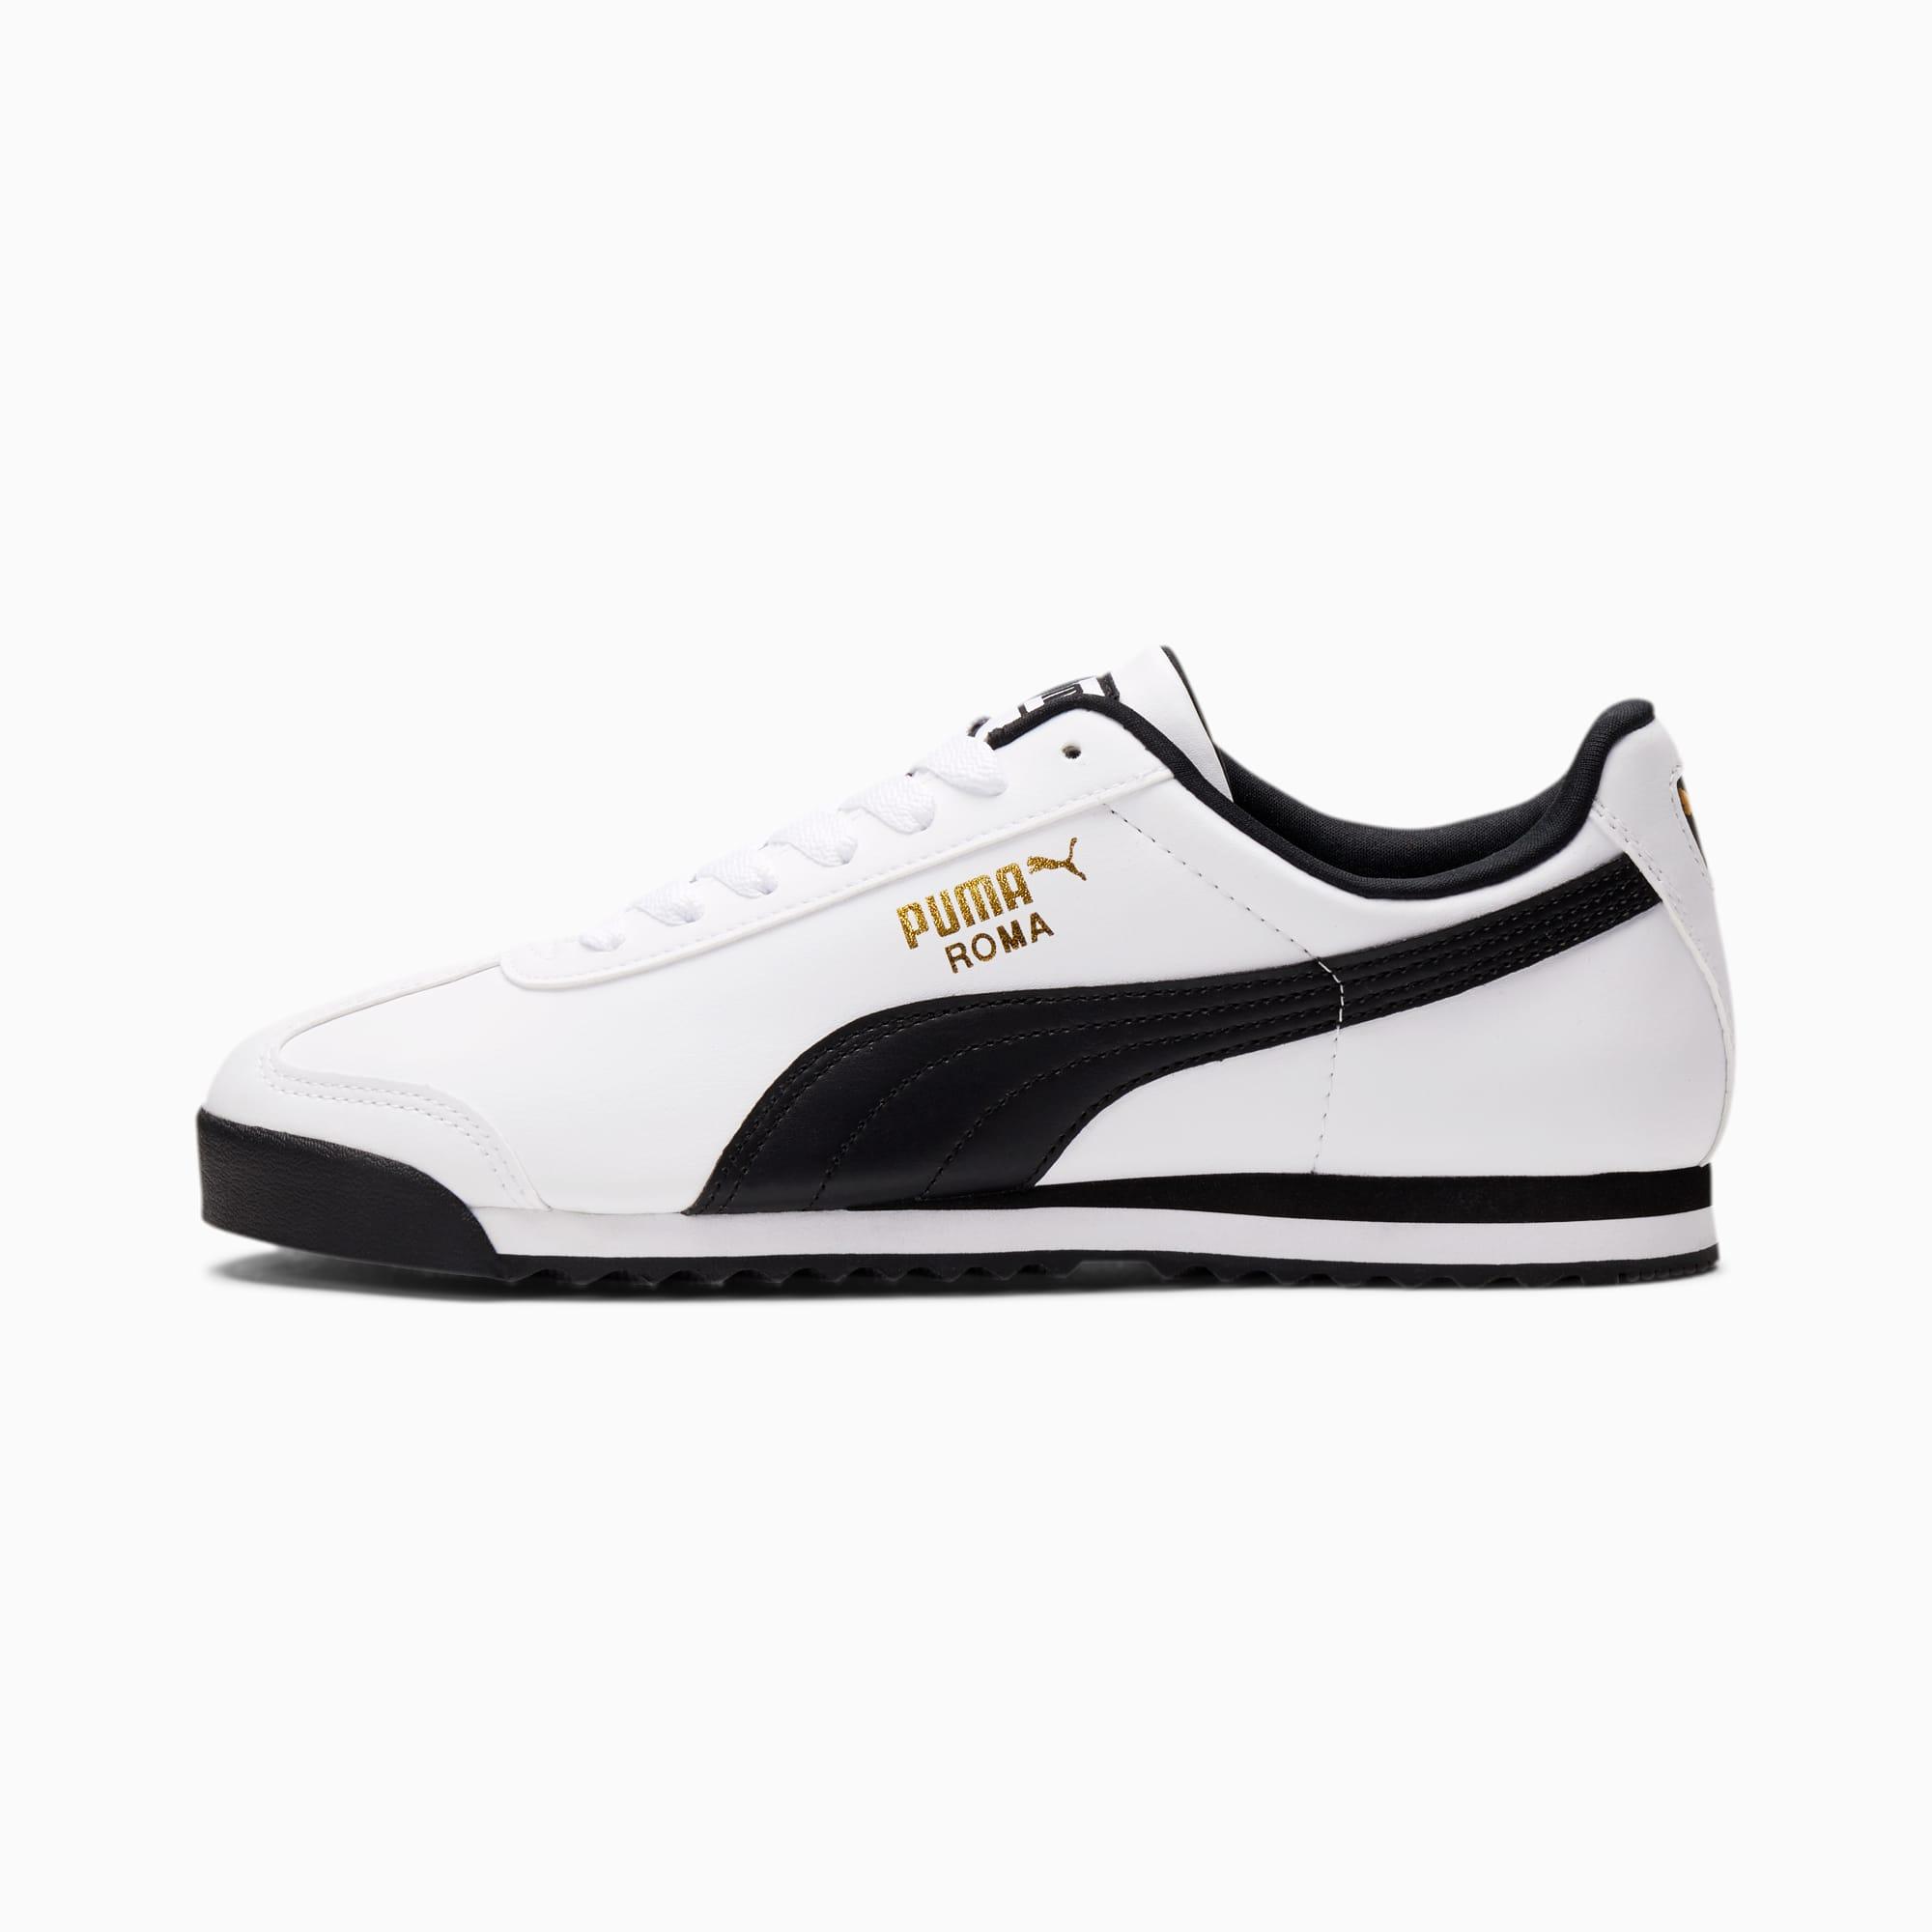 PUMA Synthetic Roma Basic Sneakers in White-Black (Black) for Men - Lyst